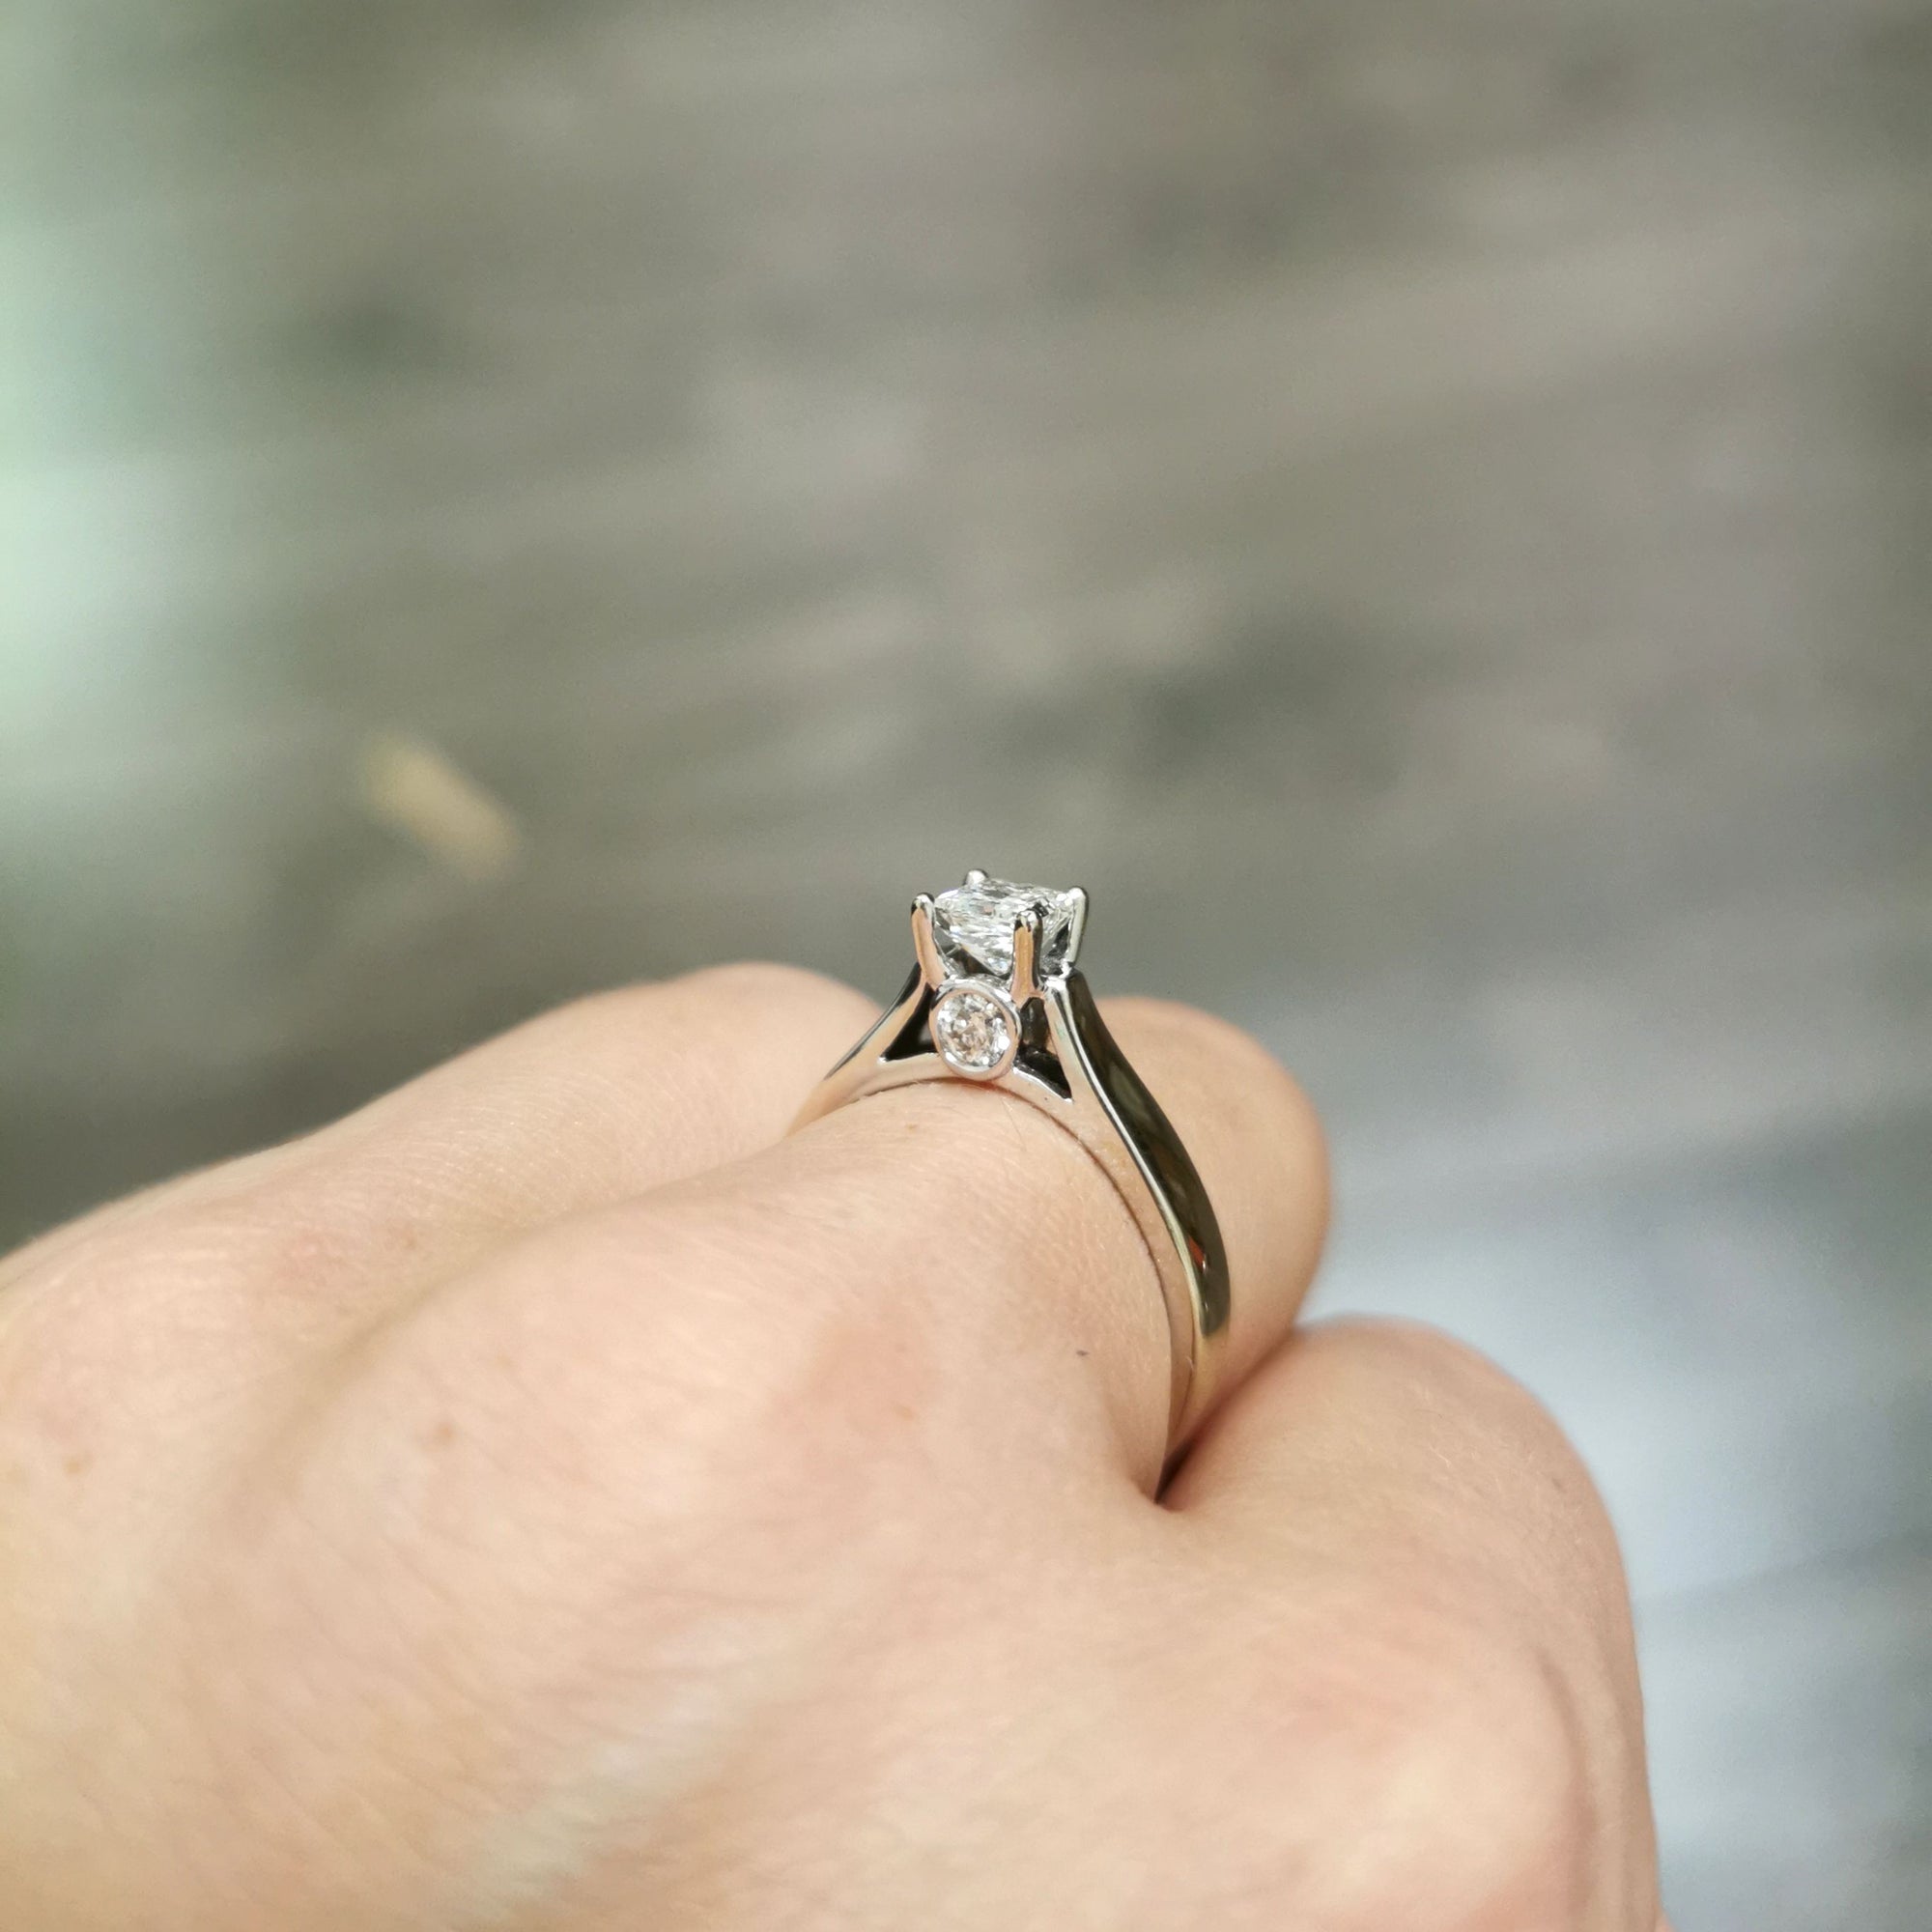 Solitaire Engagement Ring With Profile Diamond Accents | 1.00 ctw | SZ 8 |